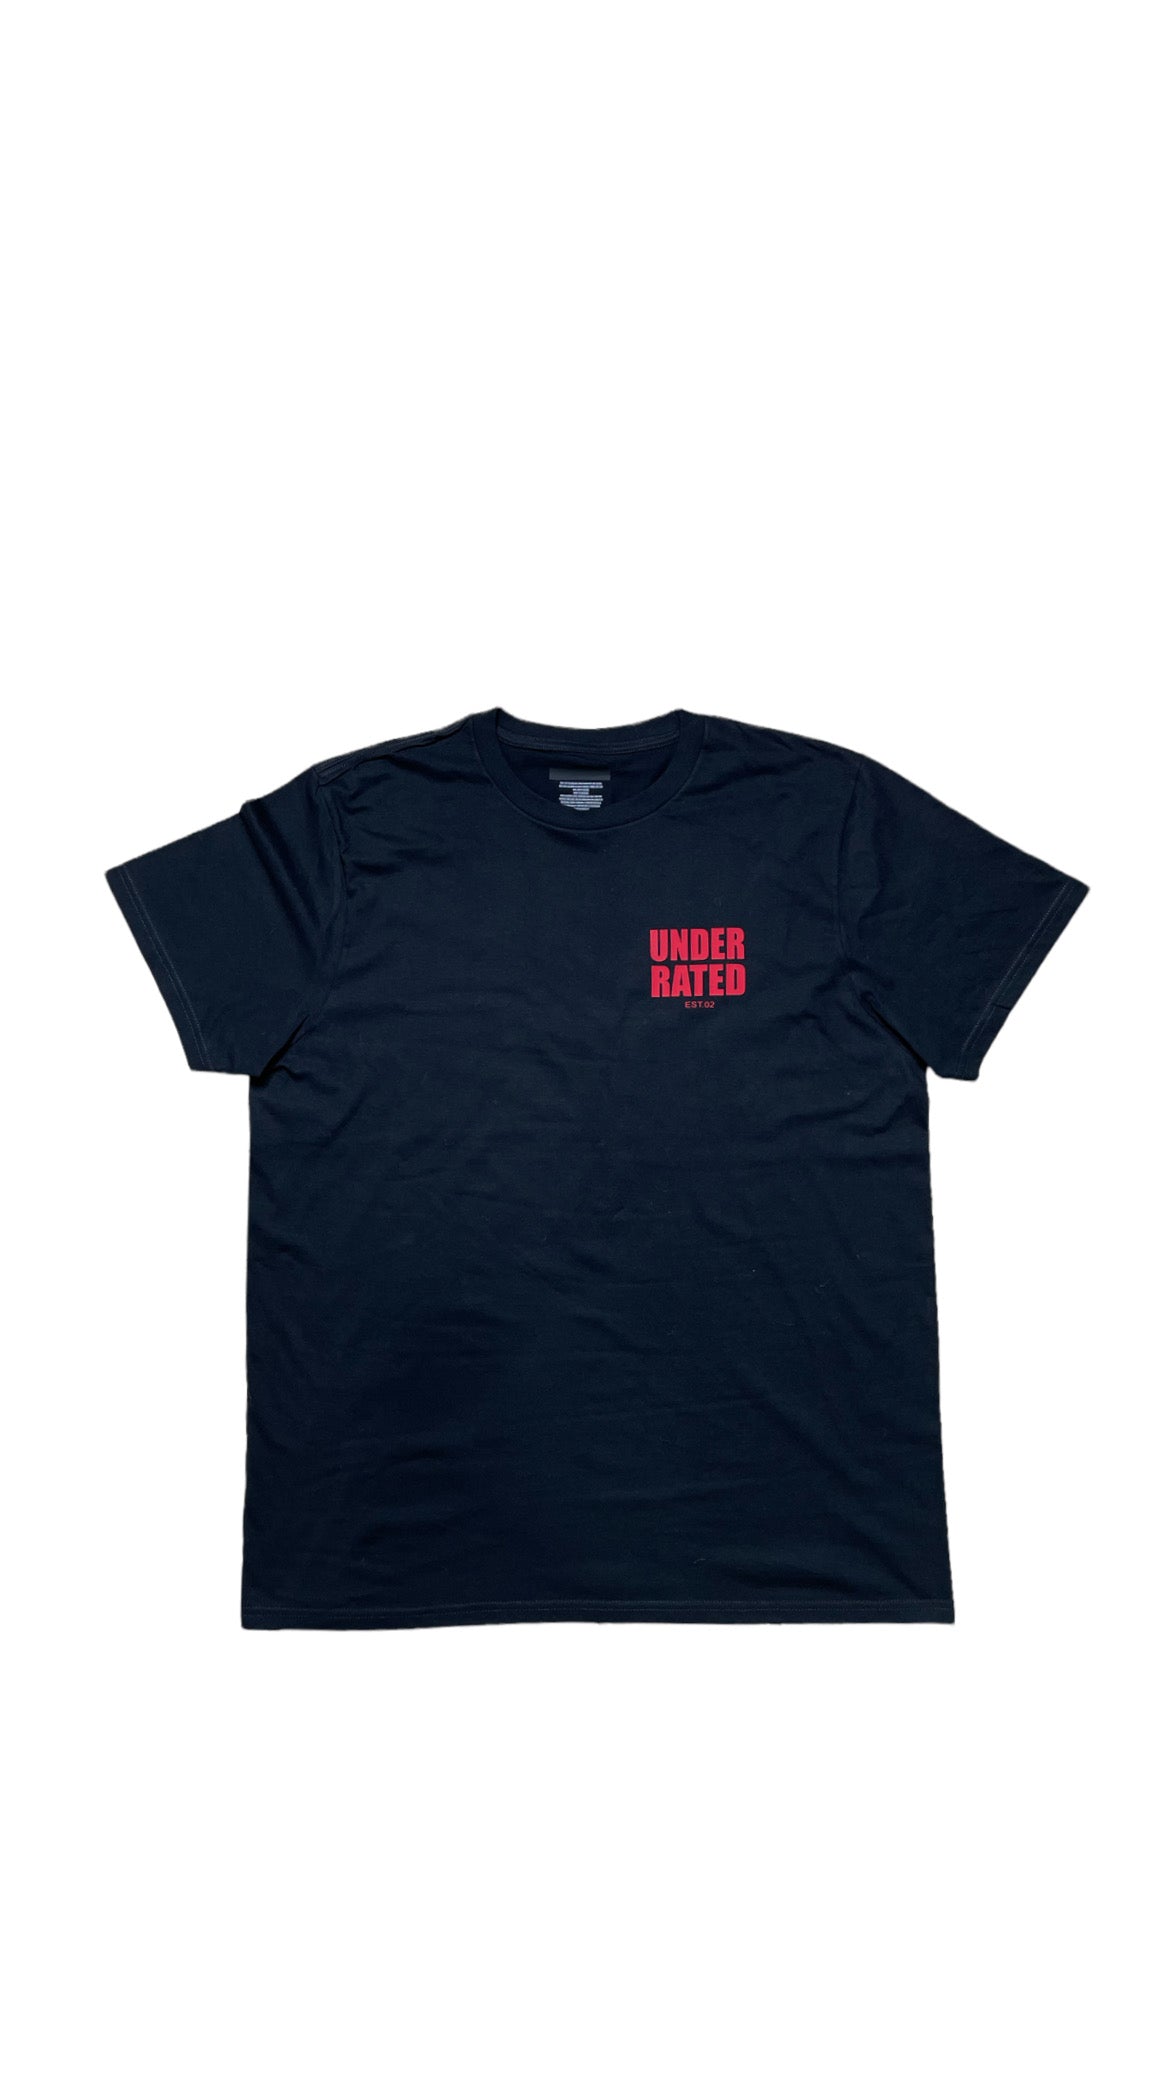 UNDERRATED BLACK T-SHIRT RED SIDE TEXT